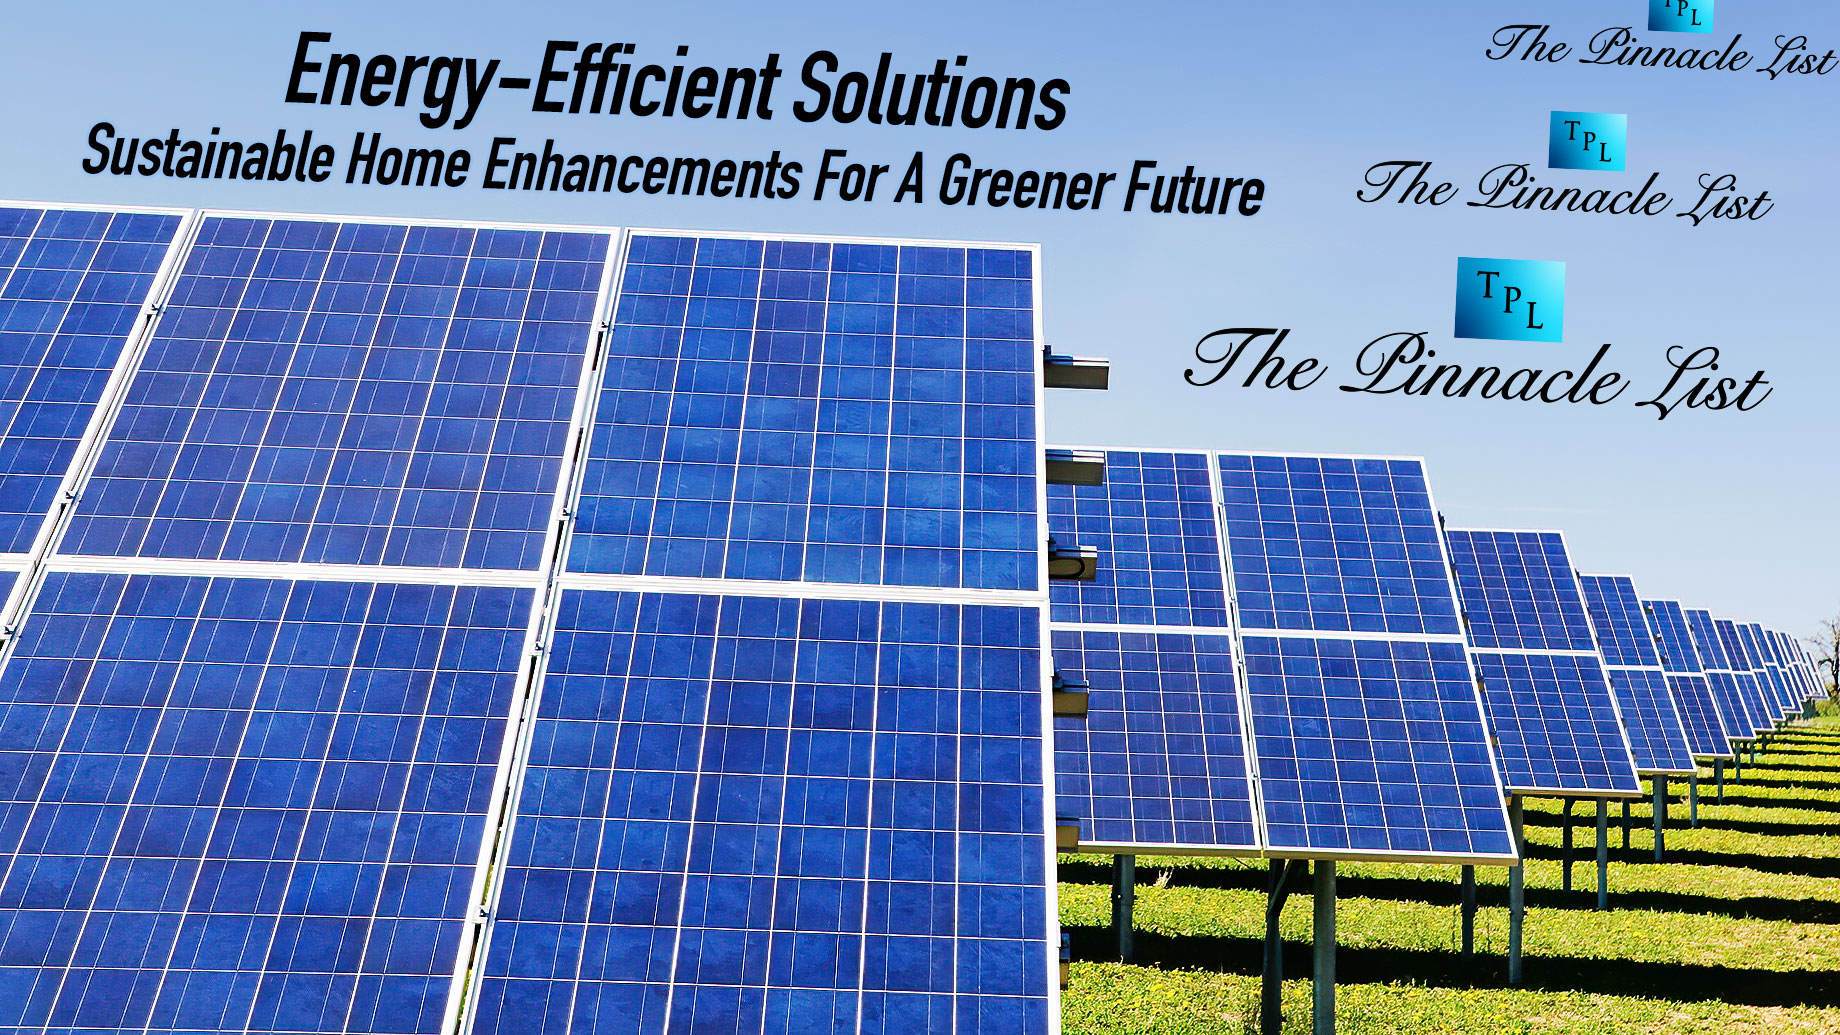 Energy-Efficient Solutions: Sustainable Home Enhancements For A Greener Future